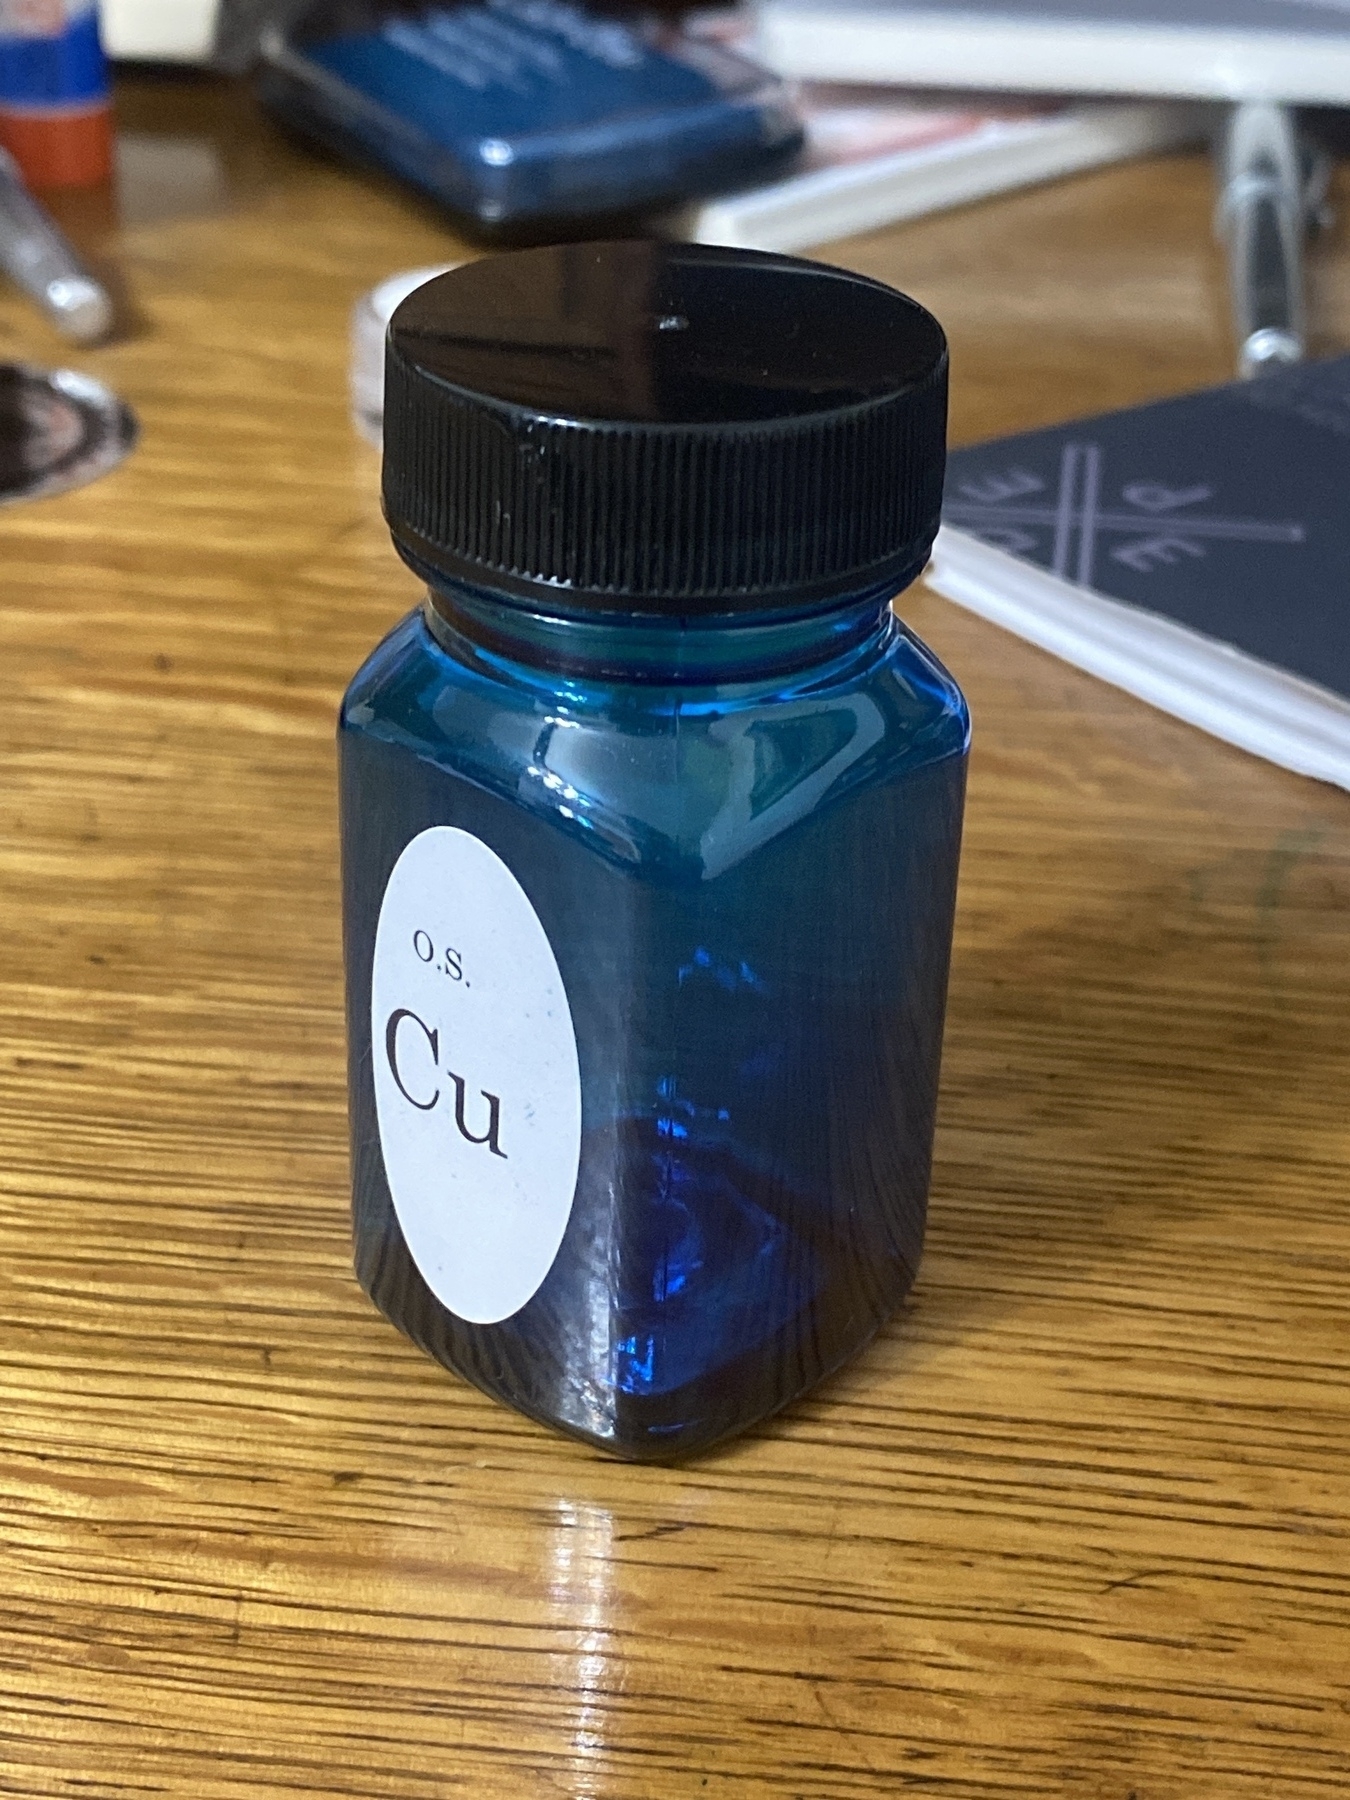 An empty bottle of fountain pen ink, with blue/turquoise ink clinging to the walls of a bottle. The bottle is sitting on a vintage oak desktop.